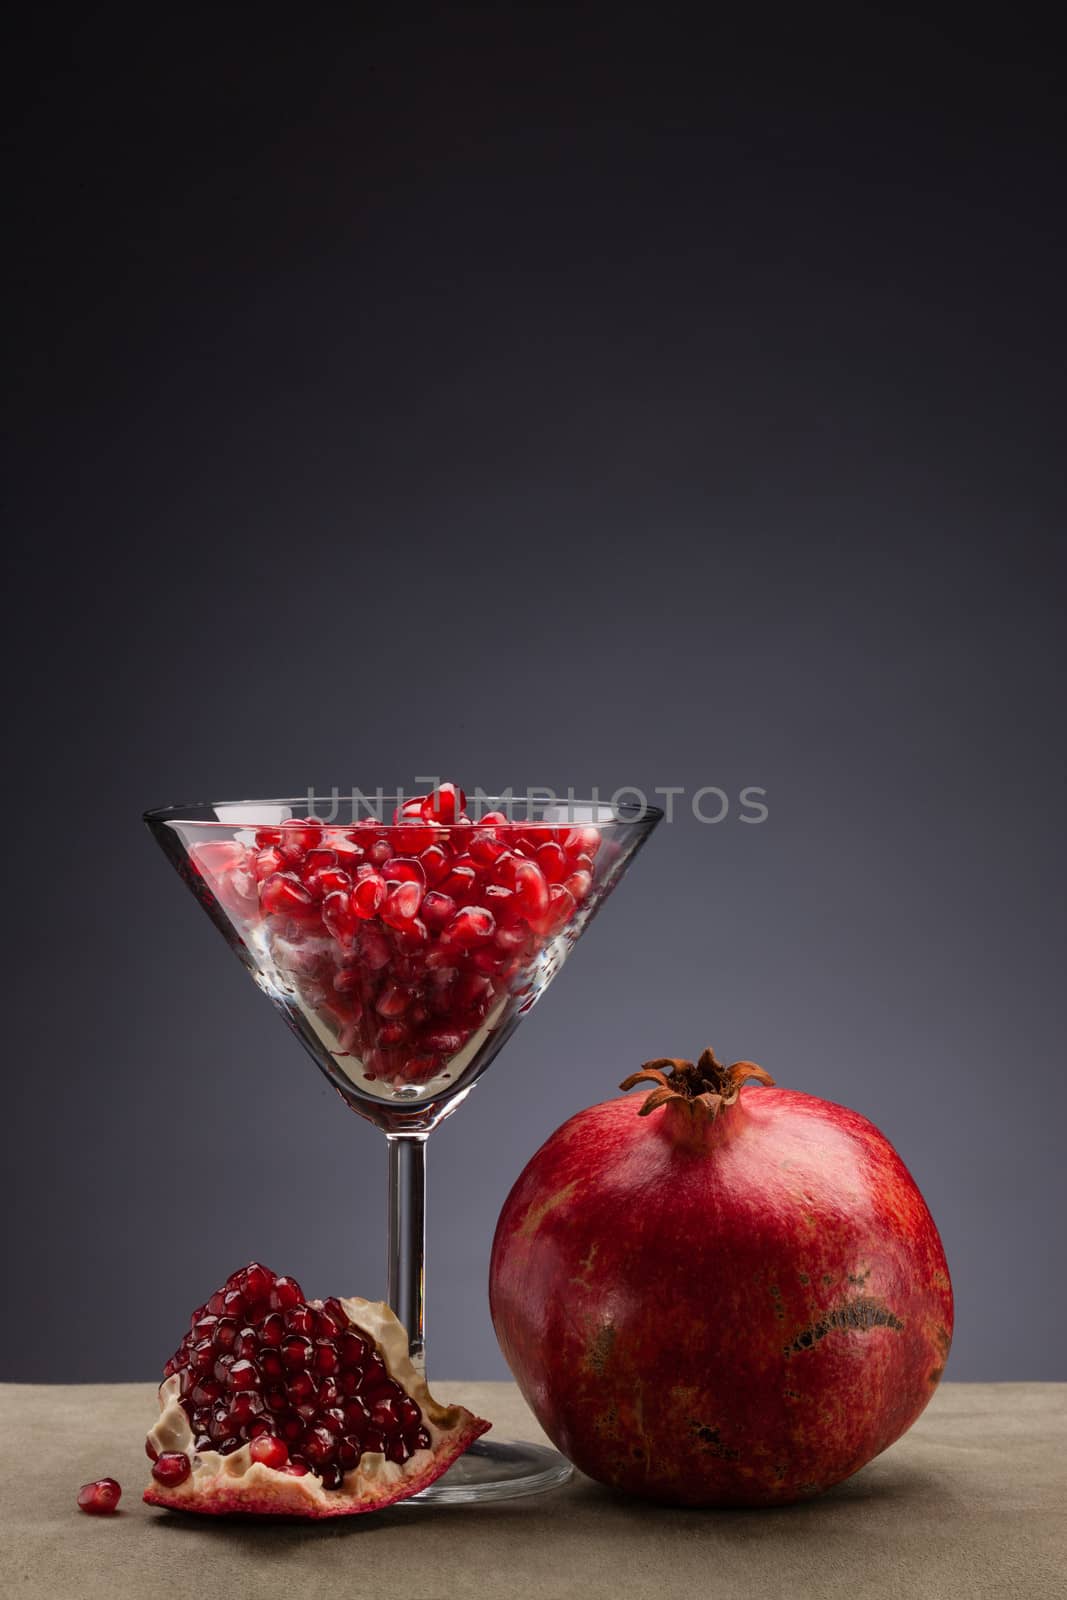 fresh and ripe pomegranate with glass full of seed